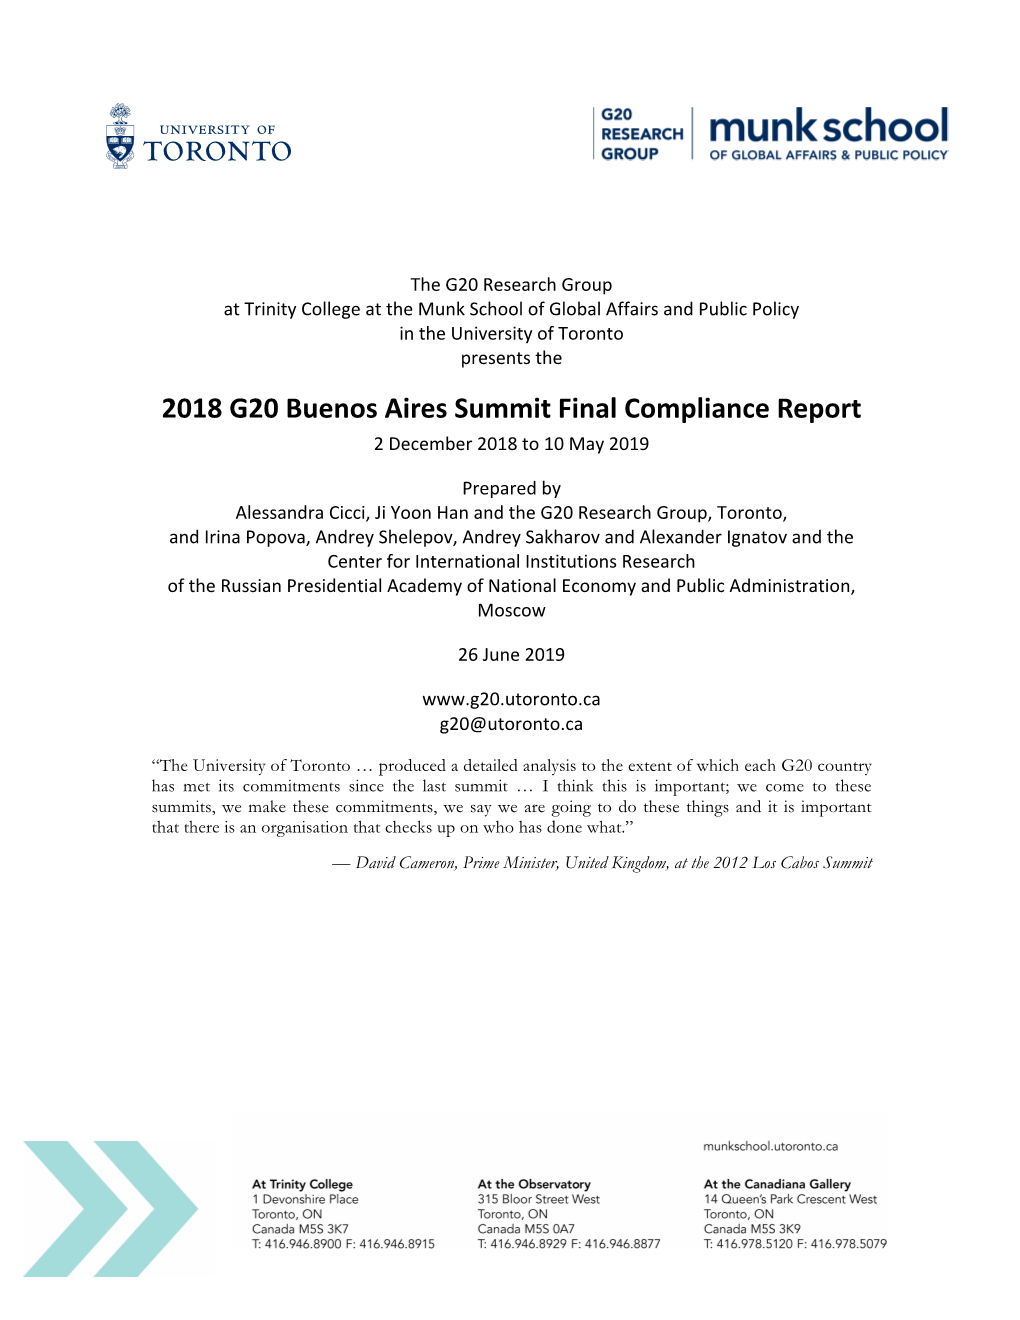 2018 G20 Buenos Aires Summit Final Compliance Report 2 December 2018 to 10 May 2019